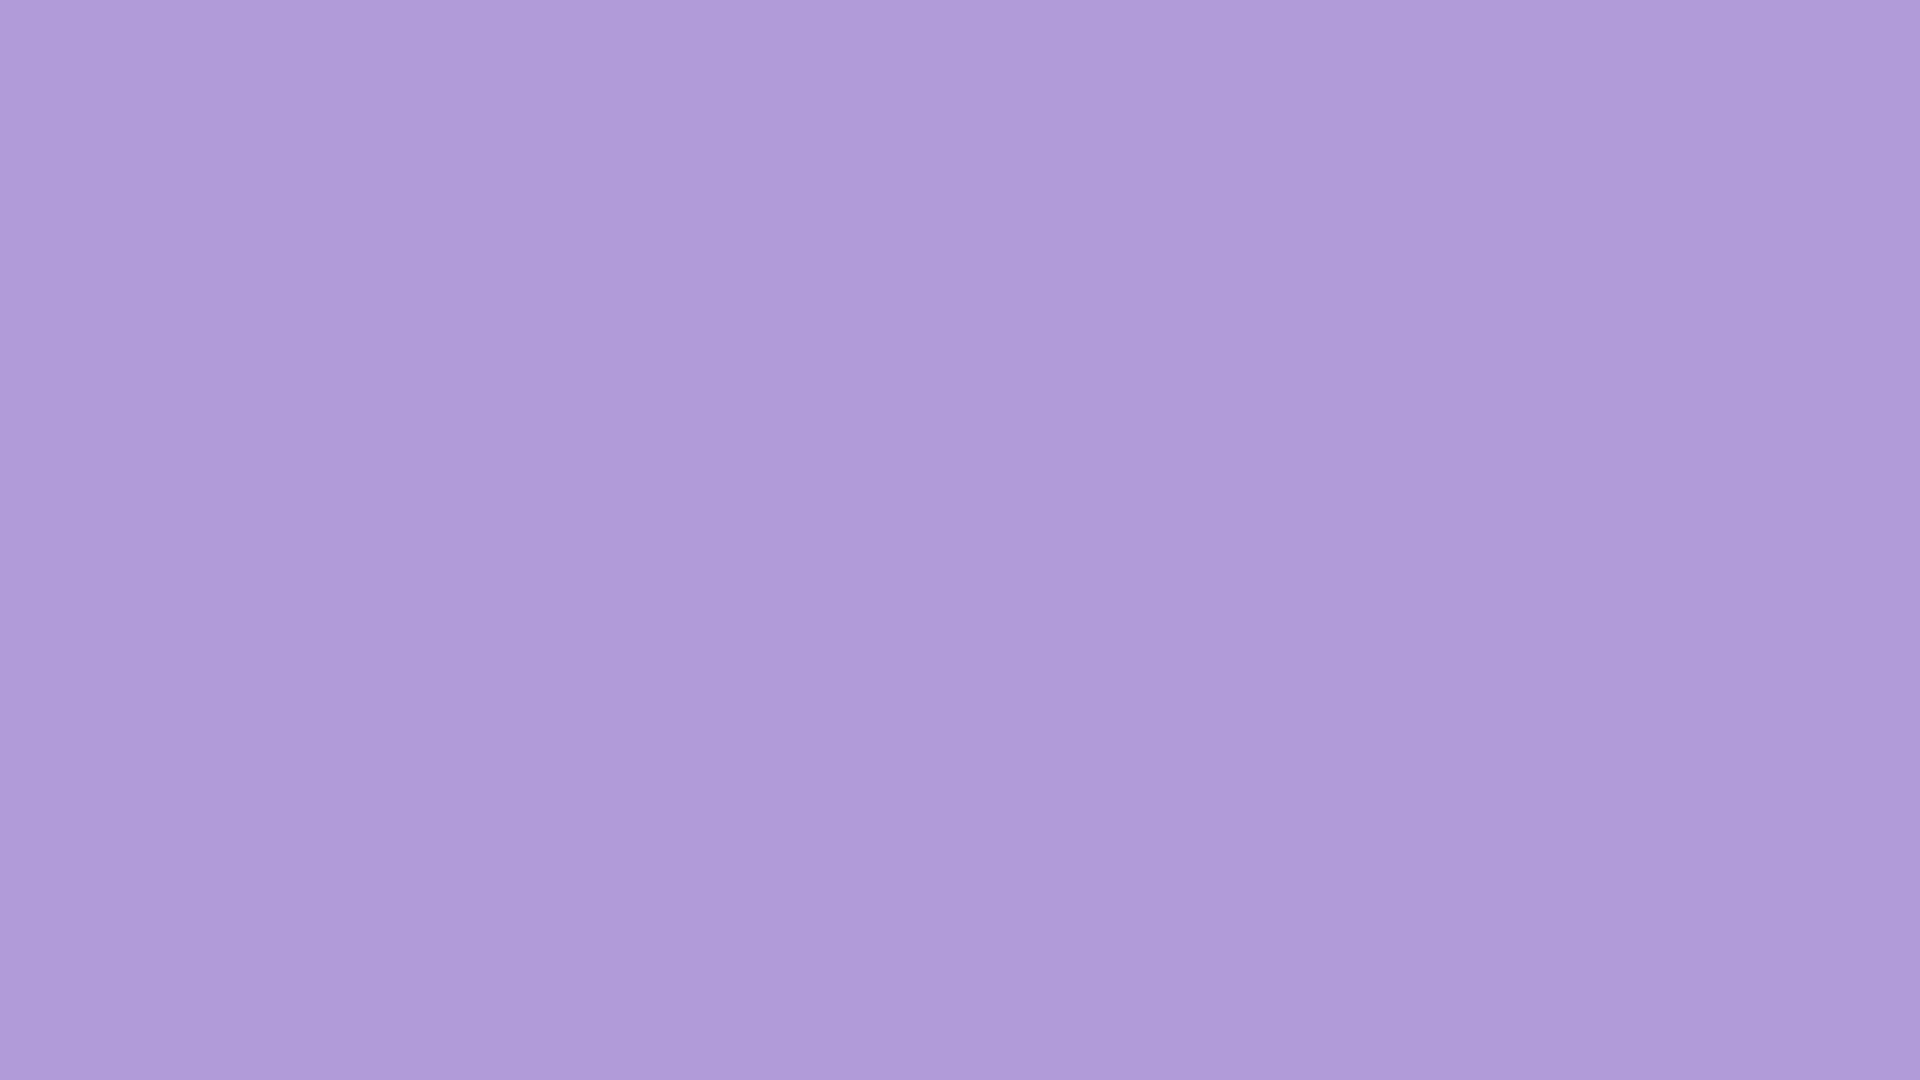 Pastel Computer Aesthetic Purple Wallpaper : Choose from hundreds of